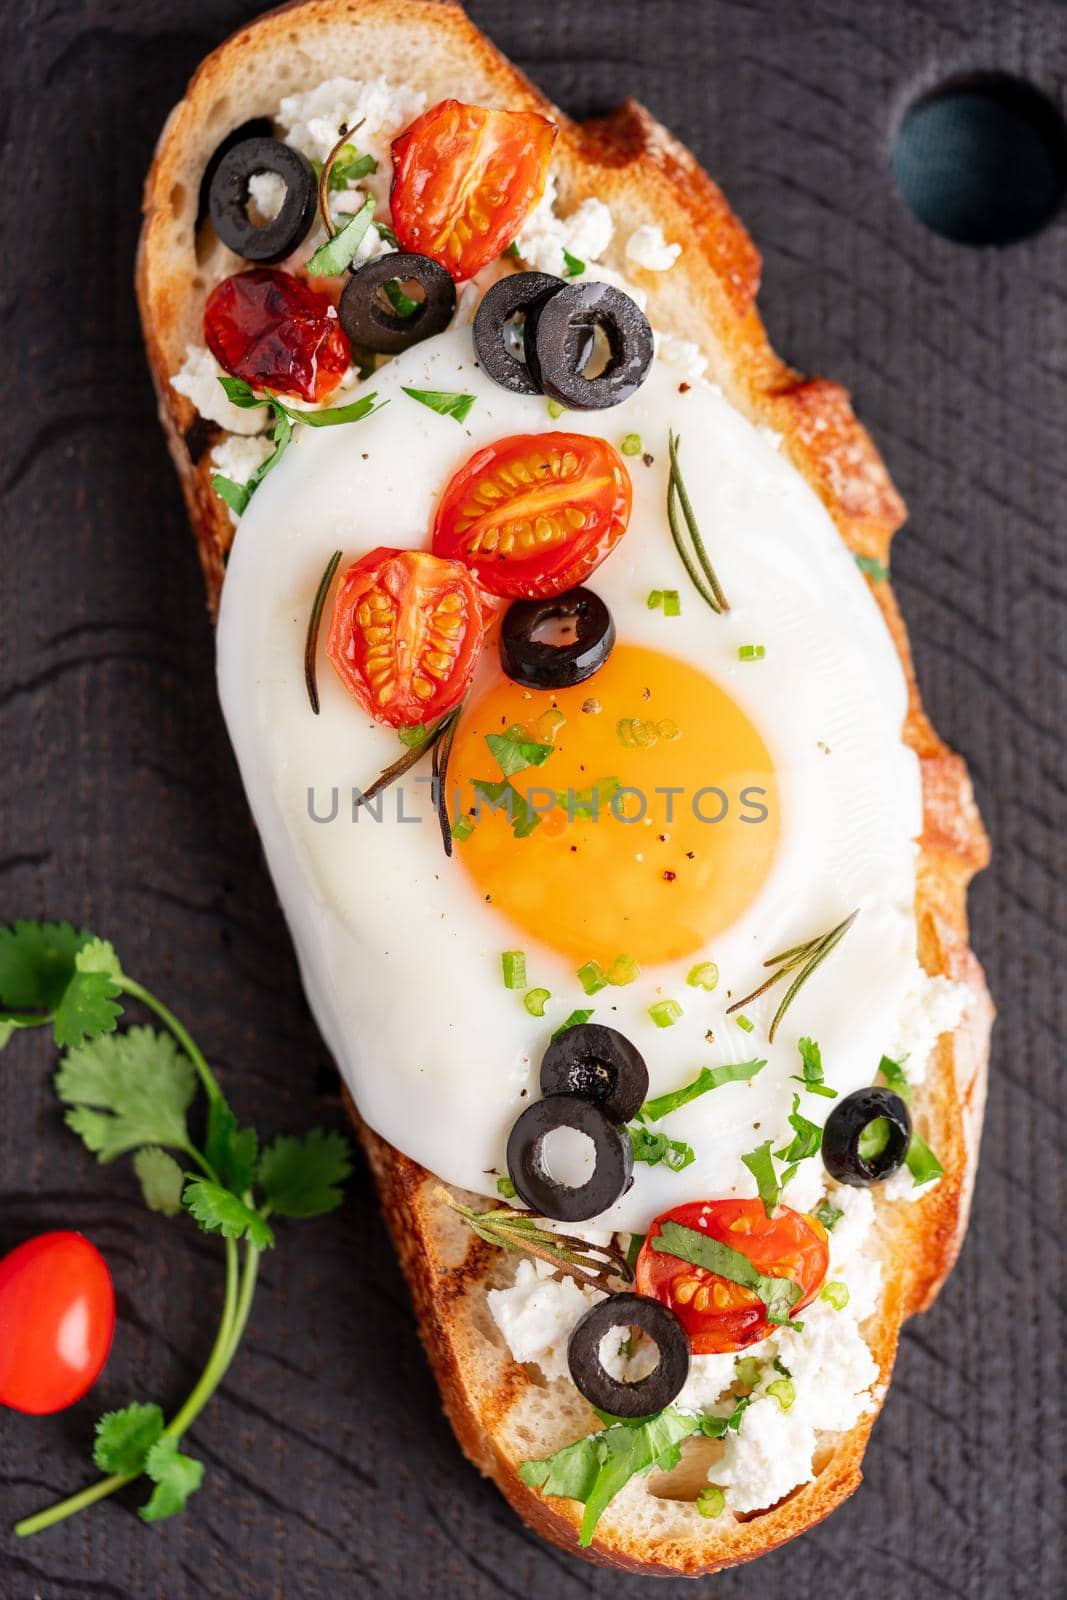 Toasted bread toast with fried eggs with yellow yolk and tomatoes, olives, sprinkled with herbs on dark wooden serving board on blue denim napkin, vertical, top view, close up